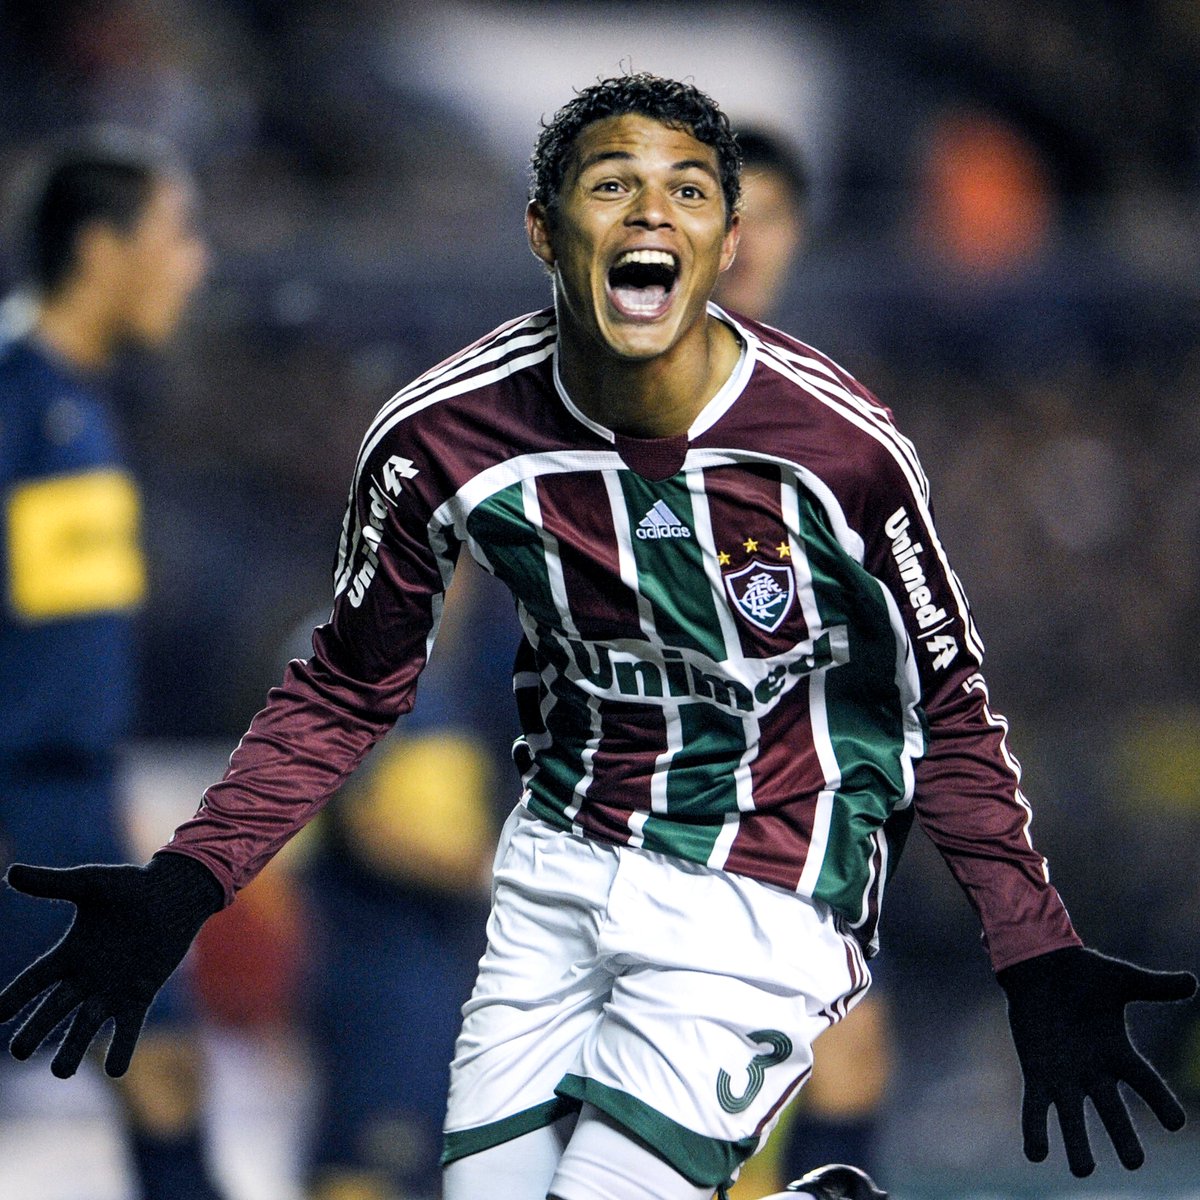 OFFICIAL: Thiago Silva will return to his boyhood club Fluminense after 14 years and 30 trophies in Europe 🏠🇧🇷